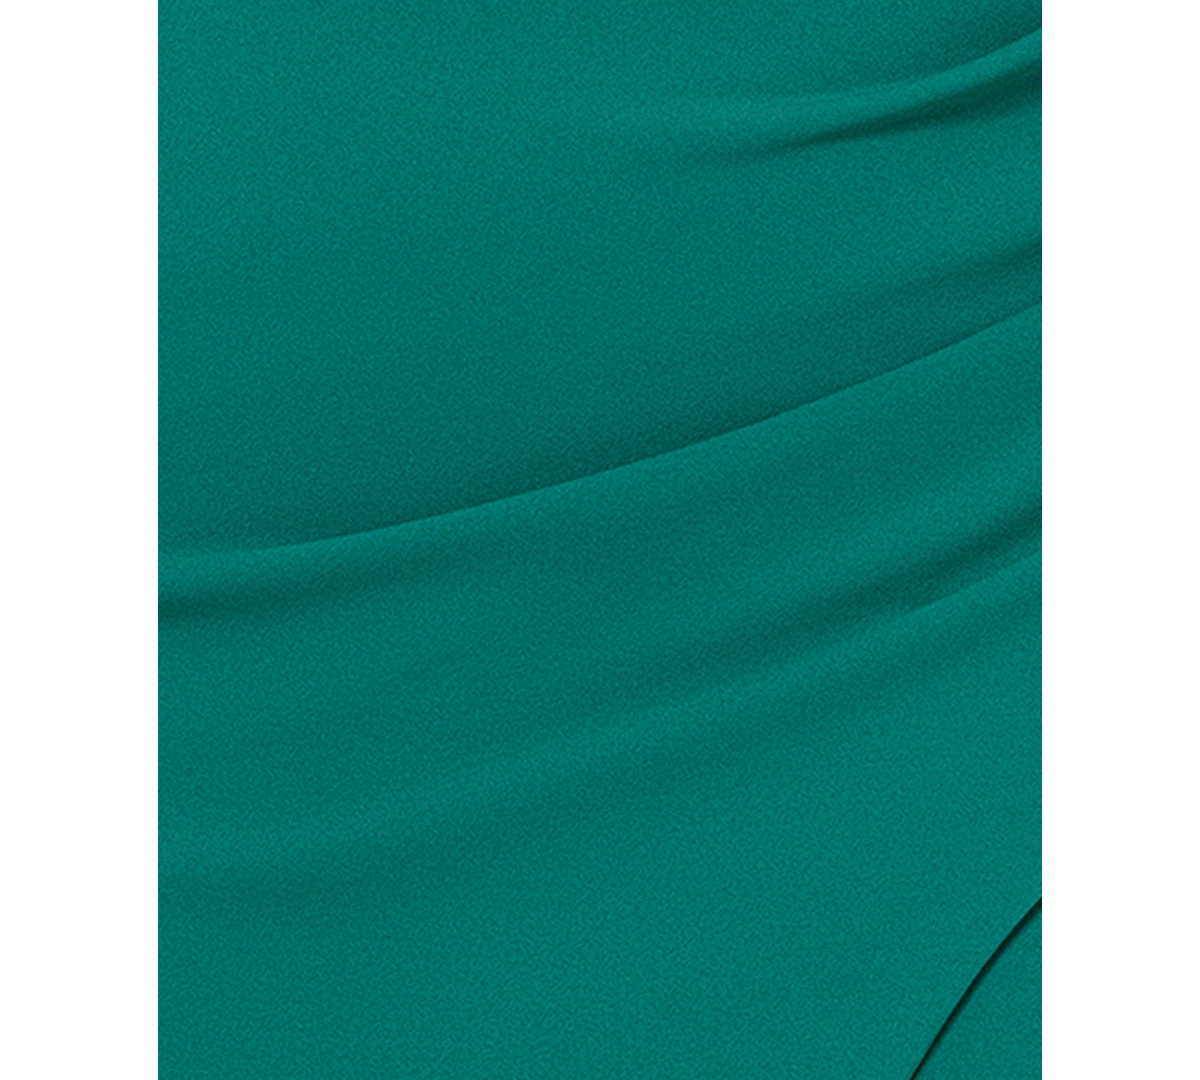 Shop Betsy & Adam Plus Size Corset Off-the-shoulder Gown In Green